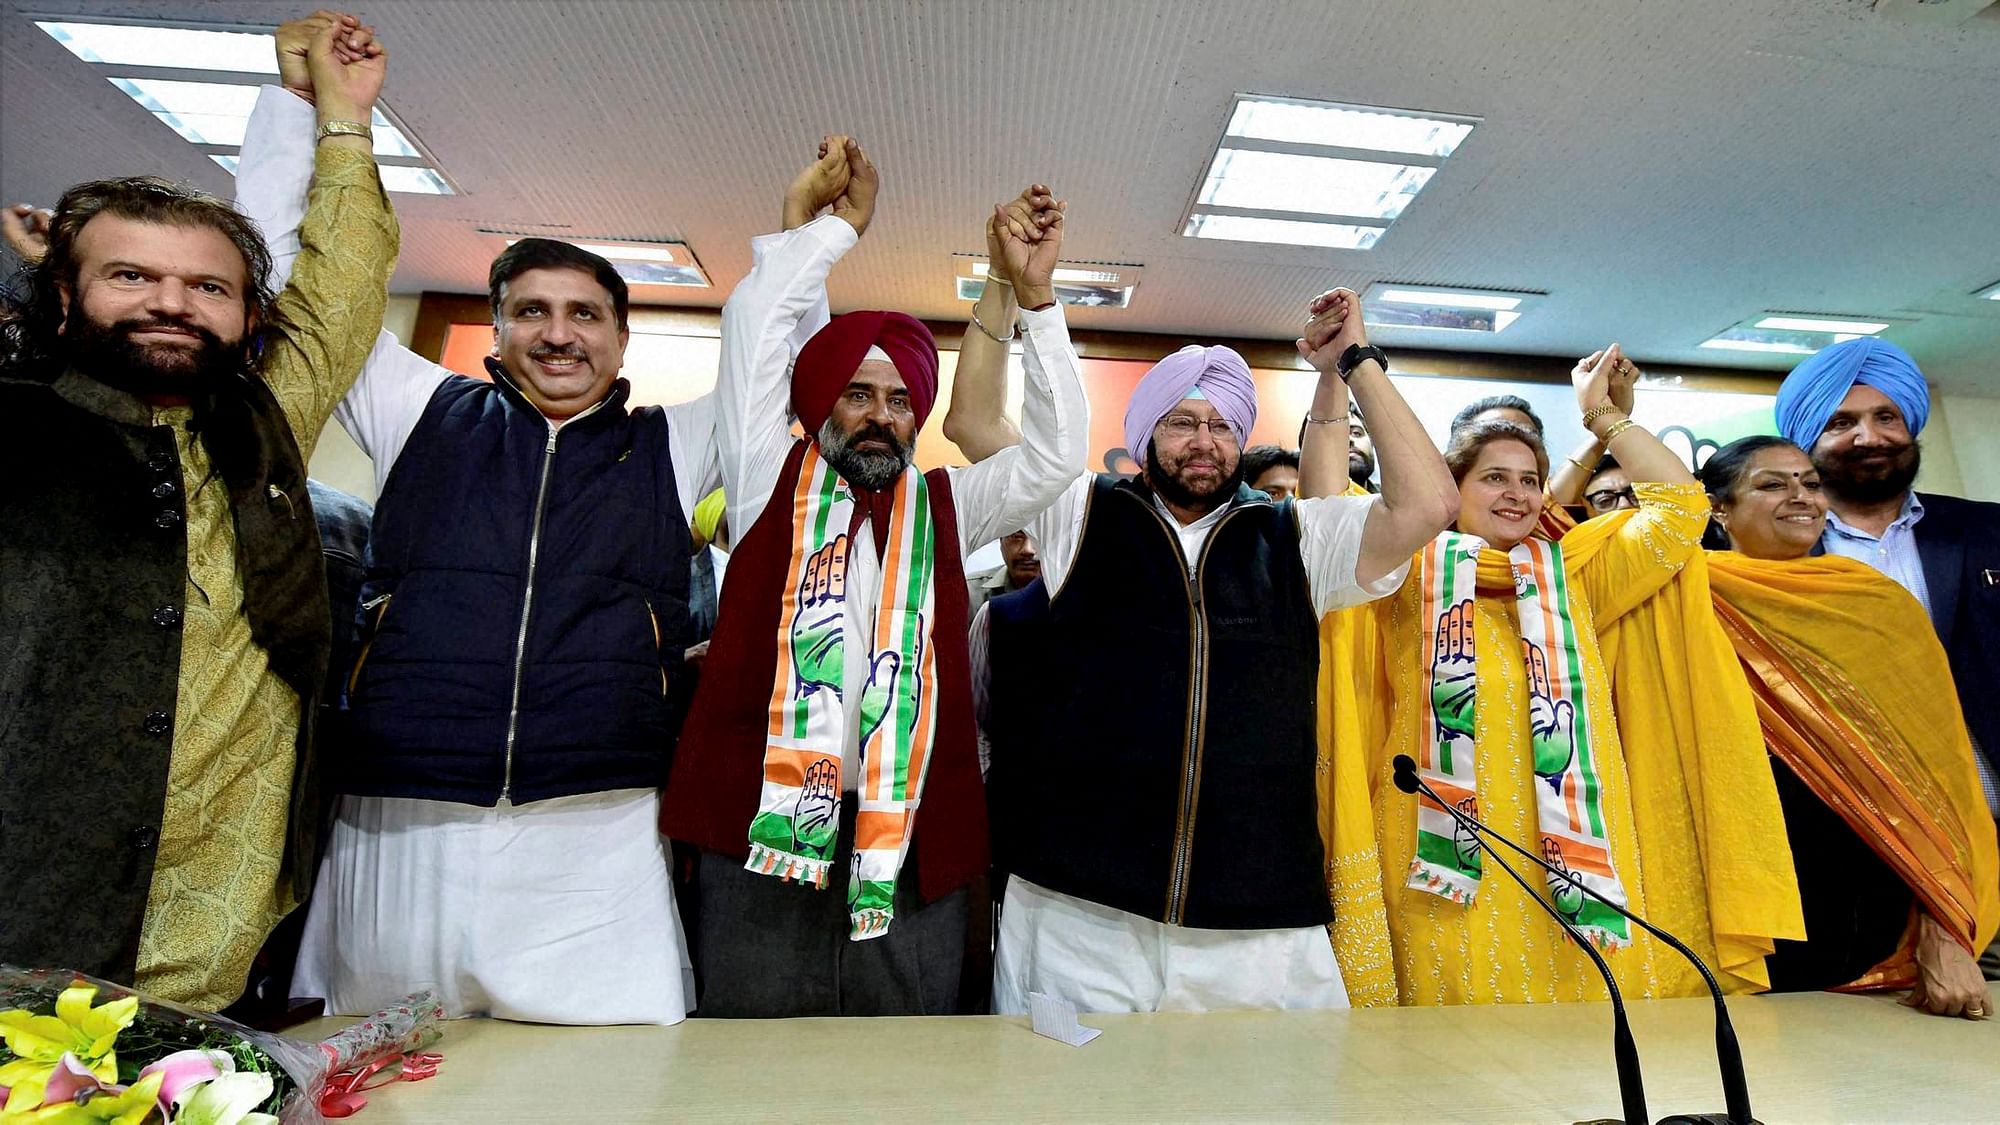 The announcement of Pargat and Kaur joining the party was made in the presence of senior Congress leaders. (Photo: PTI)